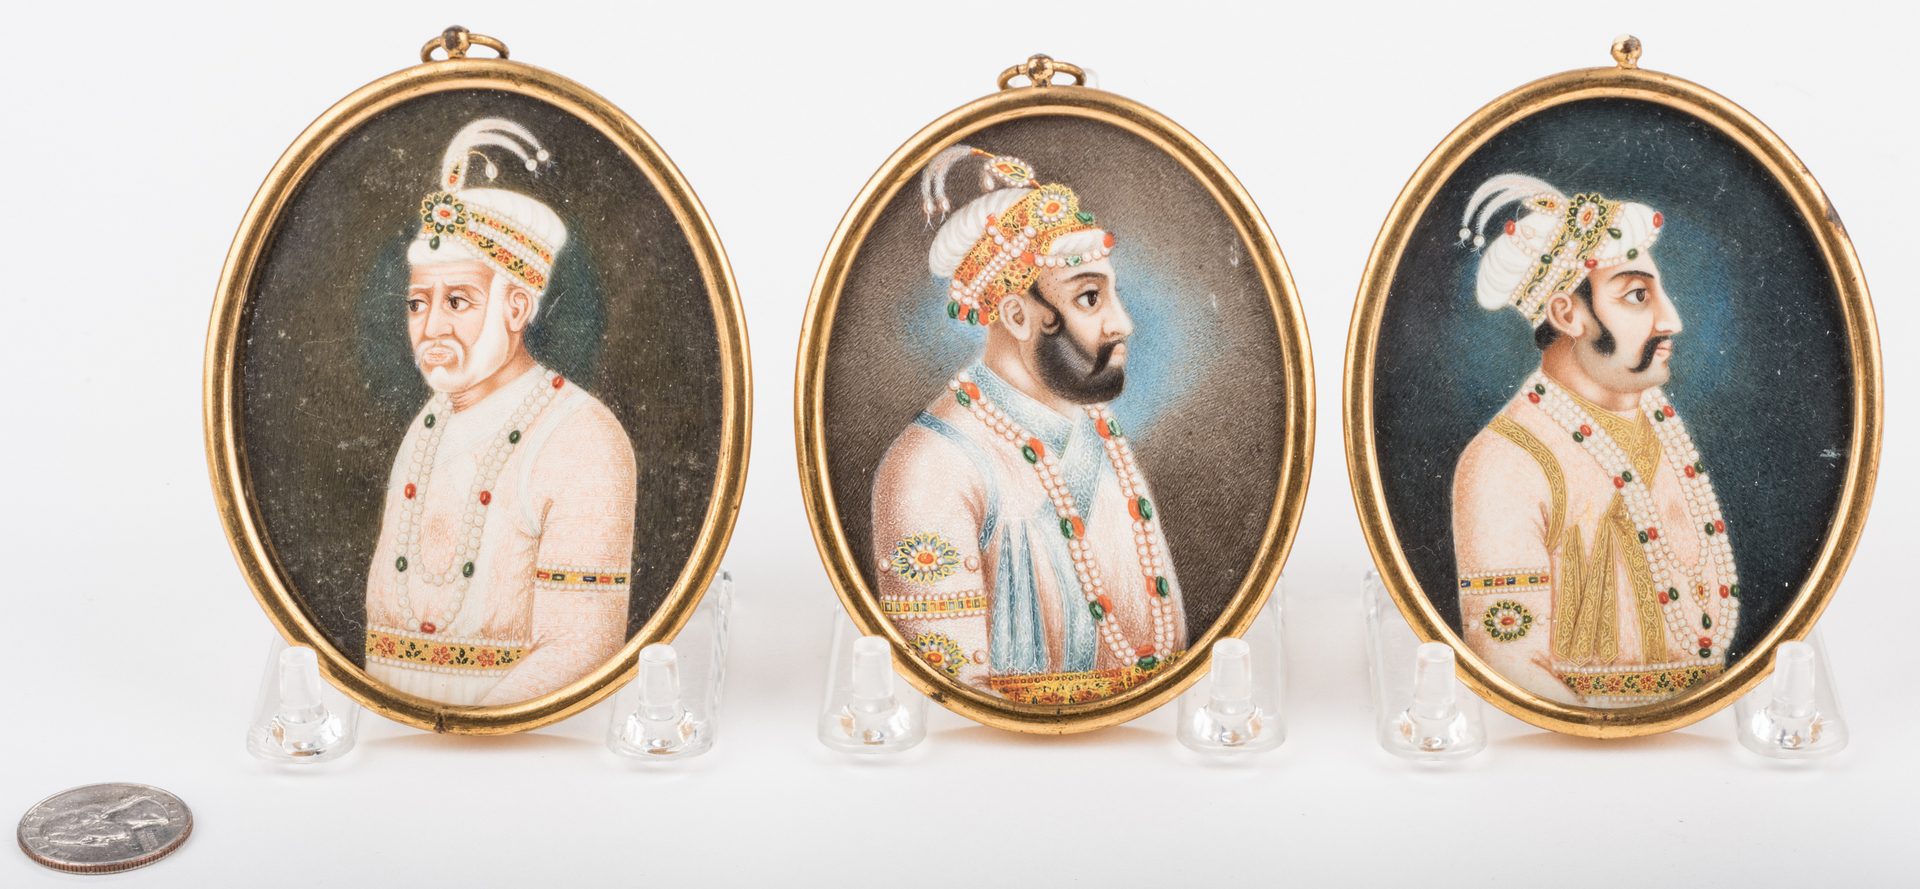 Lot 164: 3 Oval Miniatures of Far East Indian Noblemen